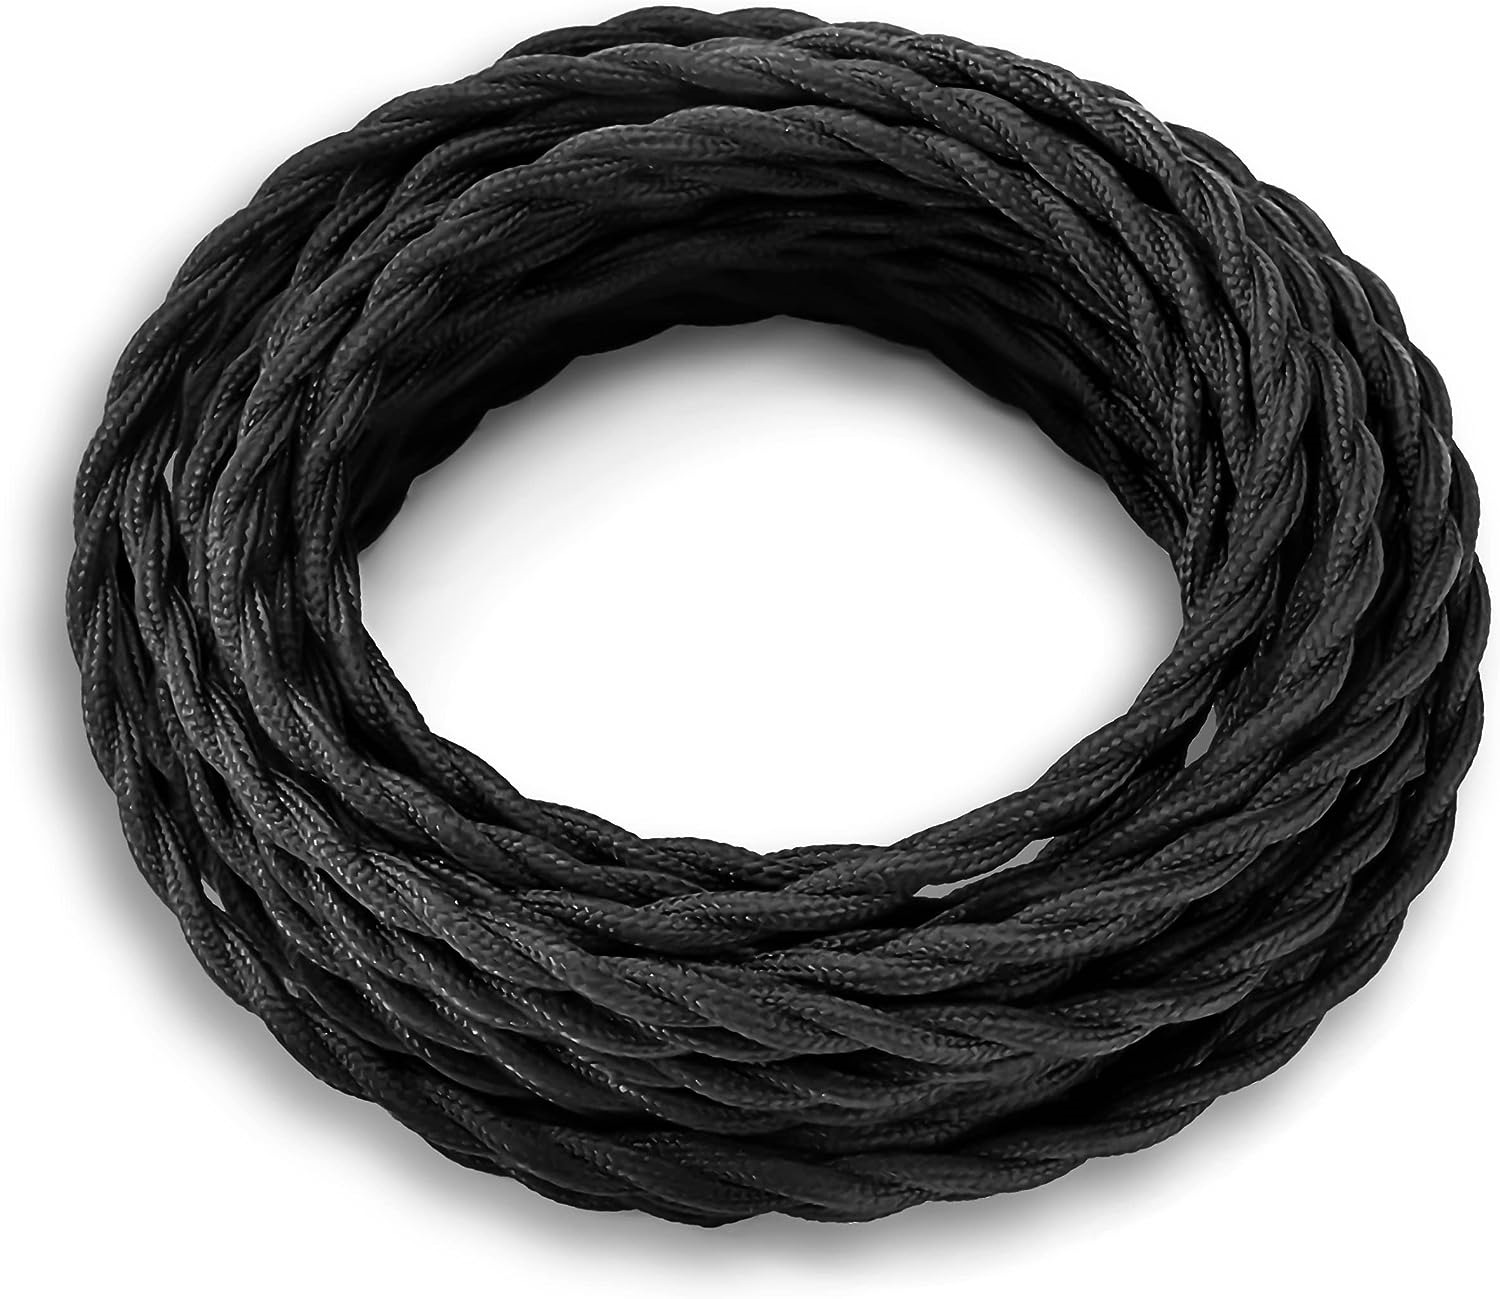 28 Ft Black Twisted Cloth Covered Wire Vintage Antique Lamp Cord Electrical Wire